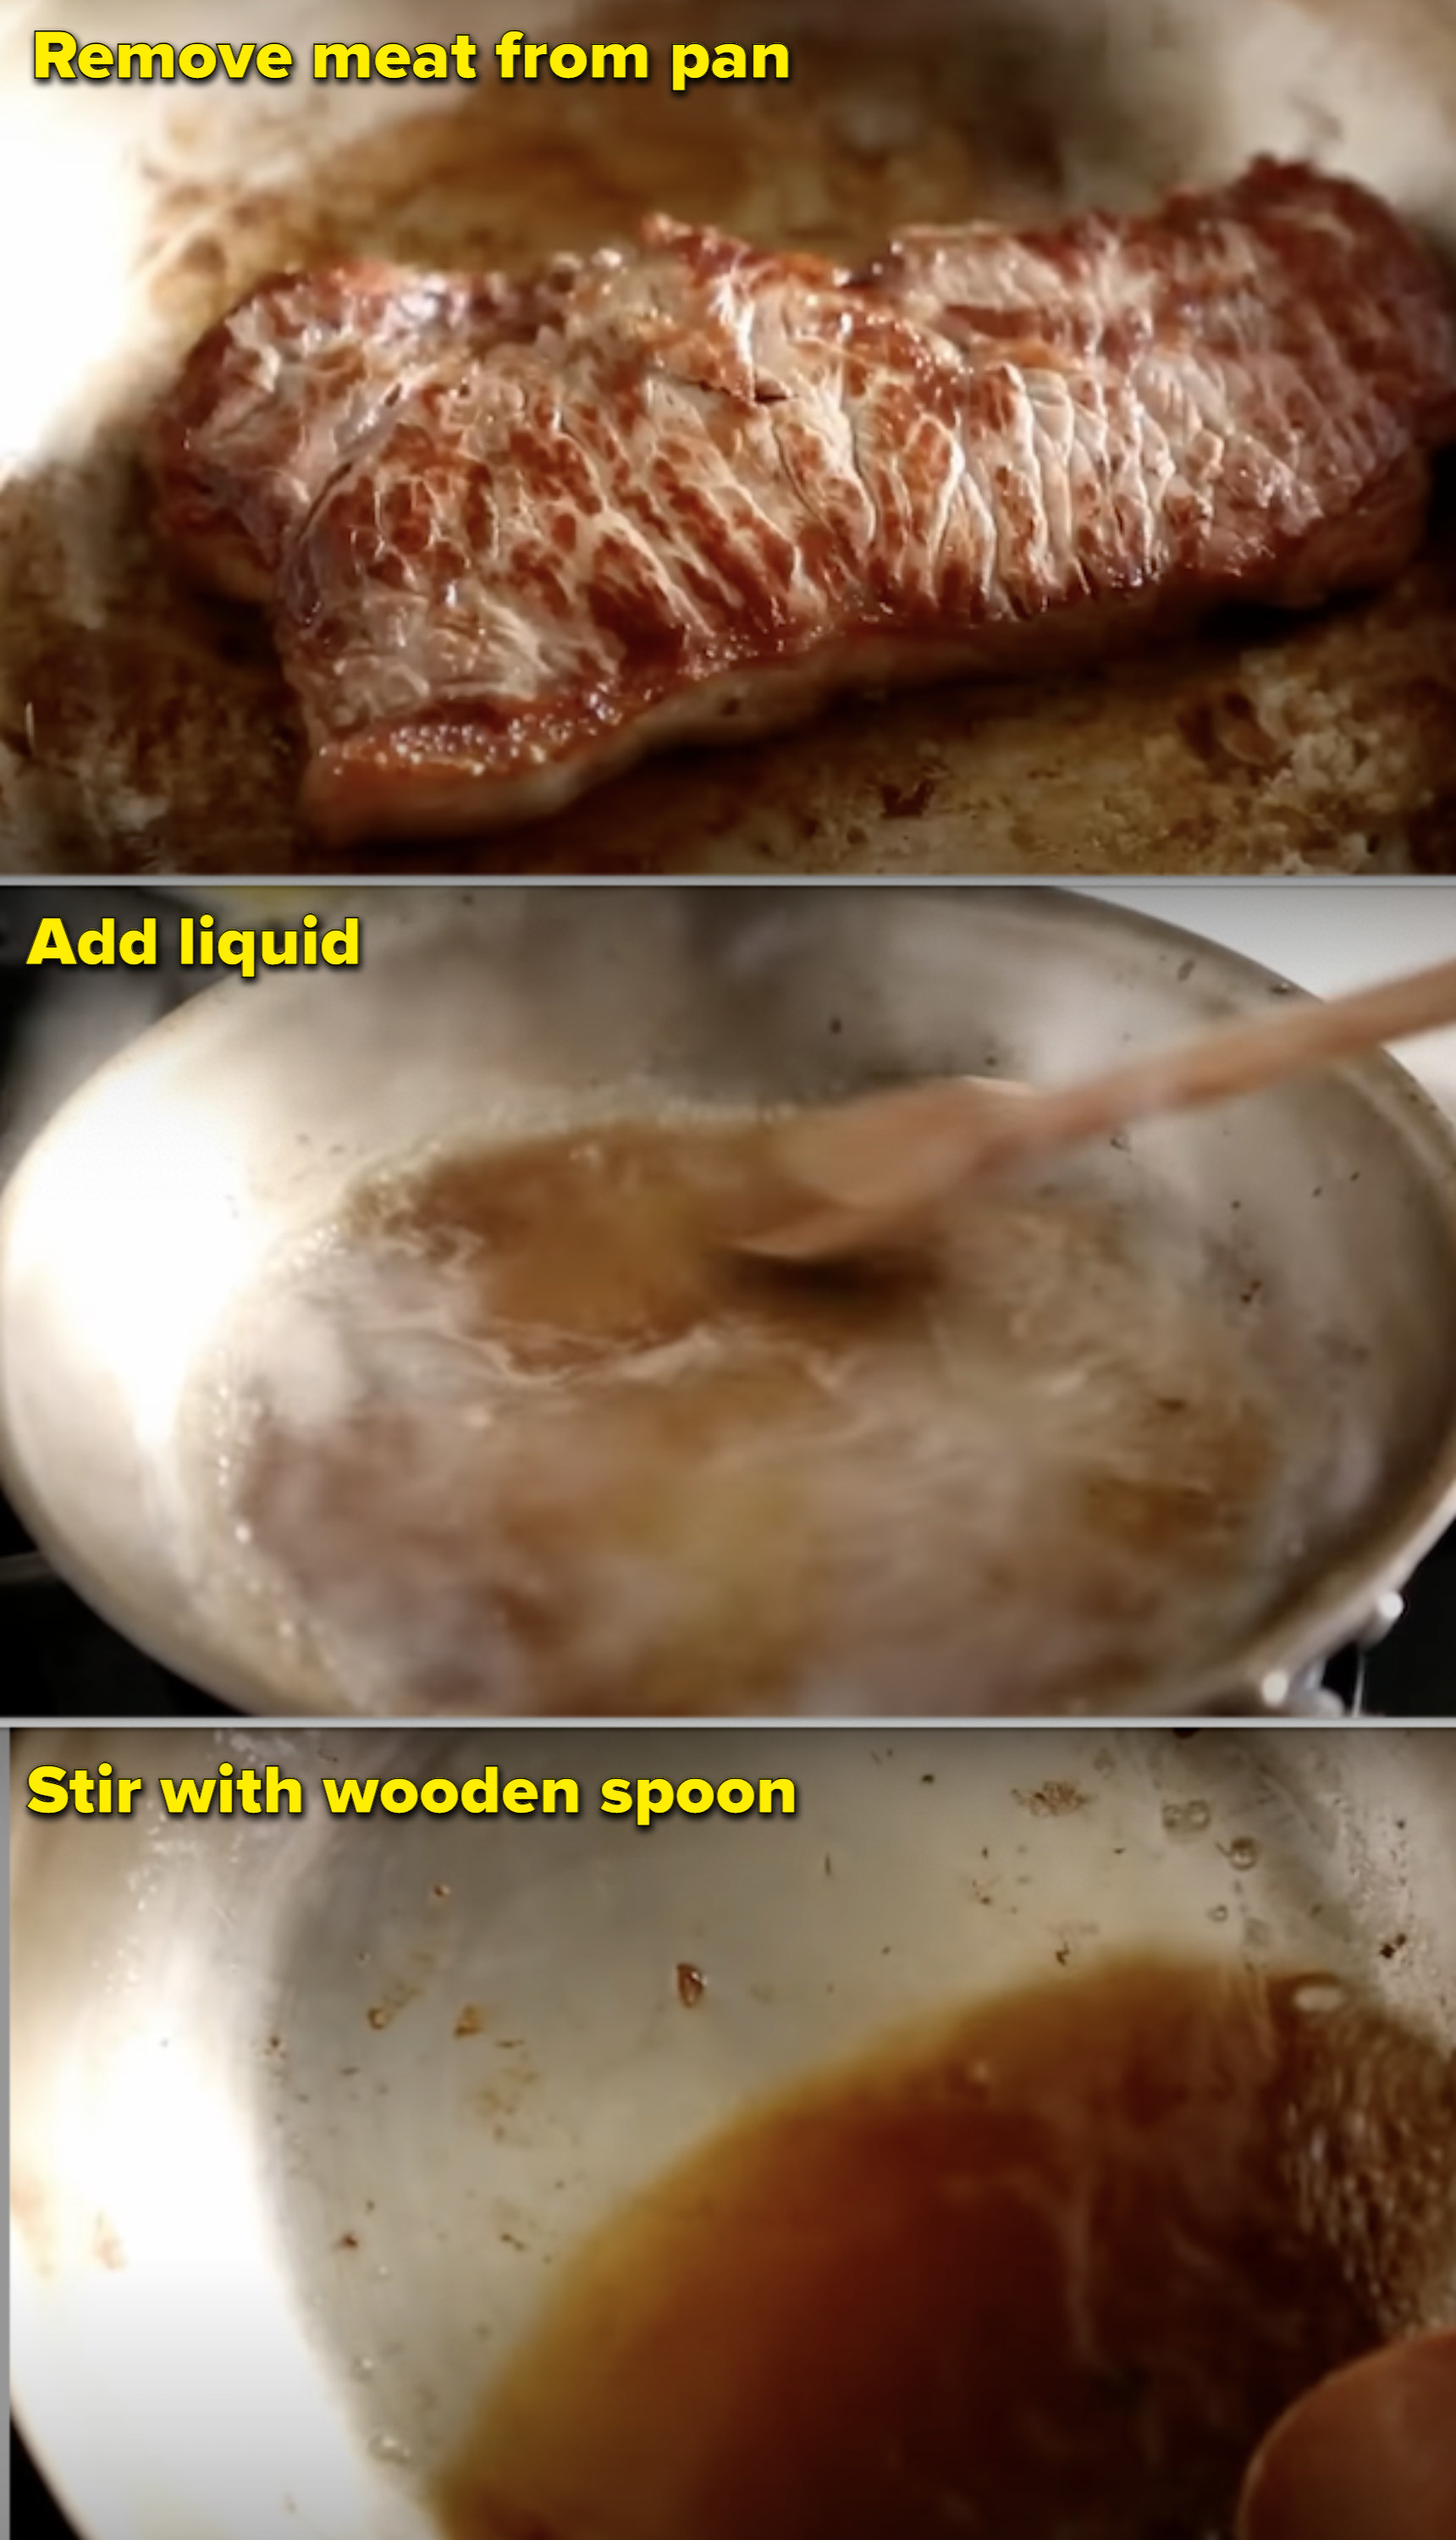 Deglazing a pan with instructions to remove the meat from pan, add liquid, and stir with a wooden spoon